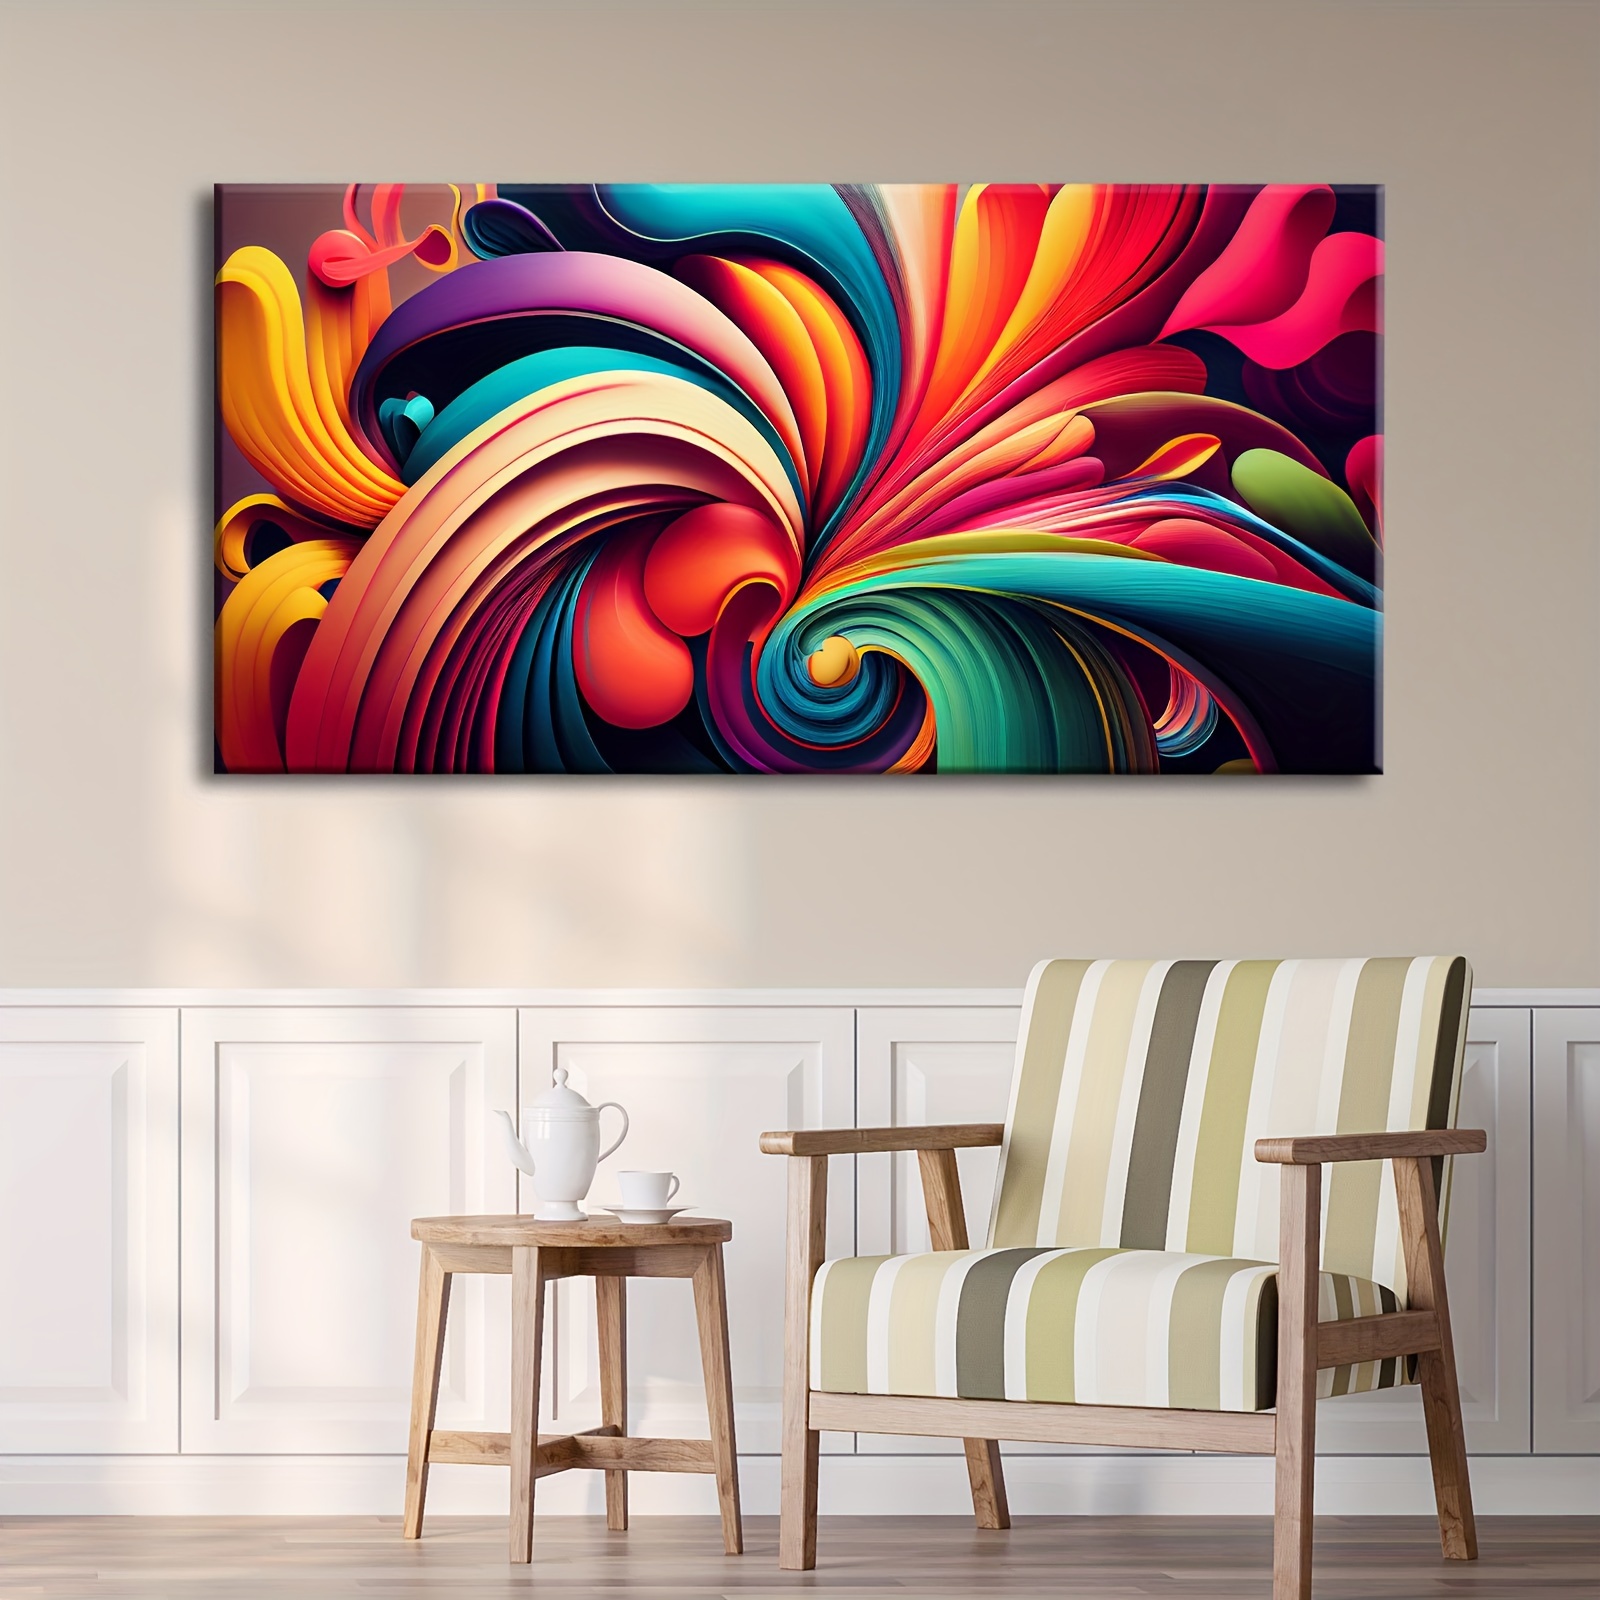 

1 Pc Large Canvas Wall Art Abstract Art Painting Endless Fantasy Colorful Background Colorful Graffiti Modern Artwork Wall Decoration For Living Room Bedroom Kitchen - Thickness 1.5 Inch